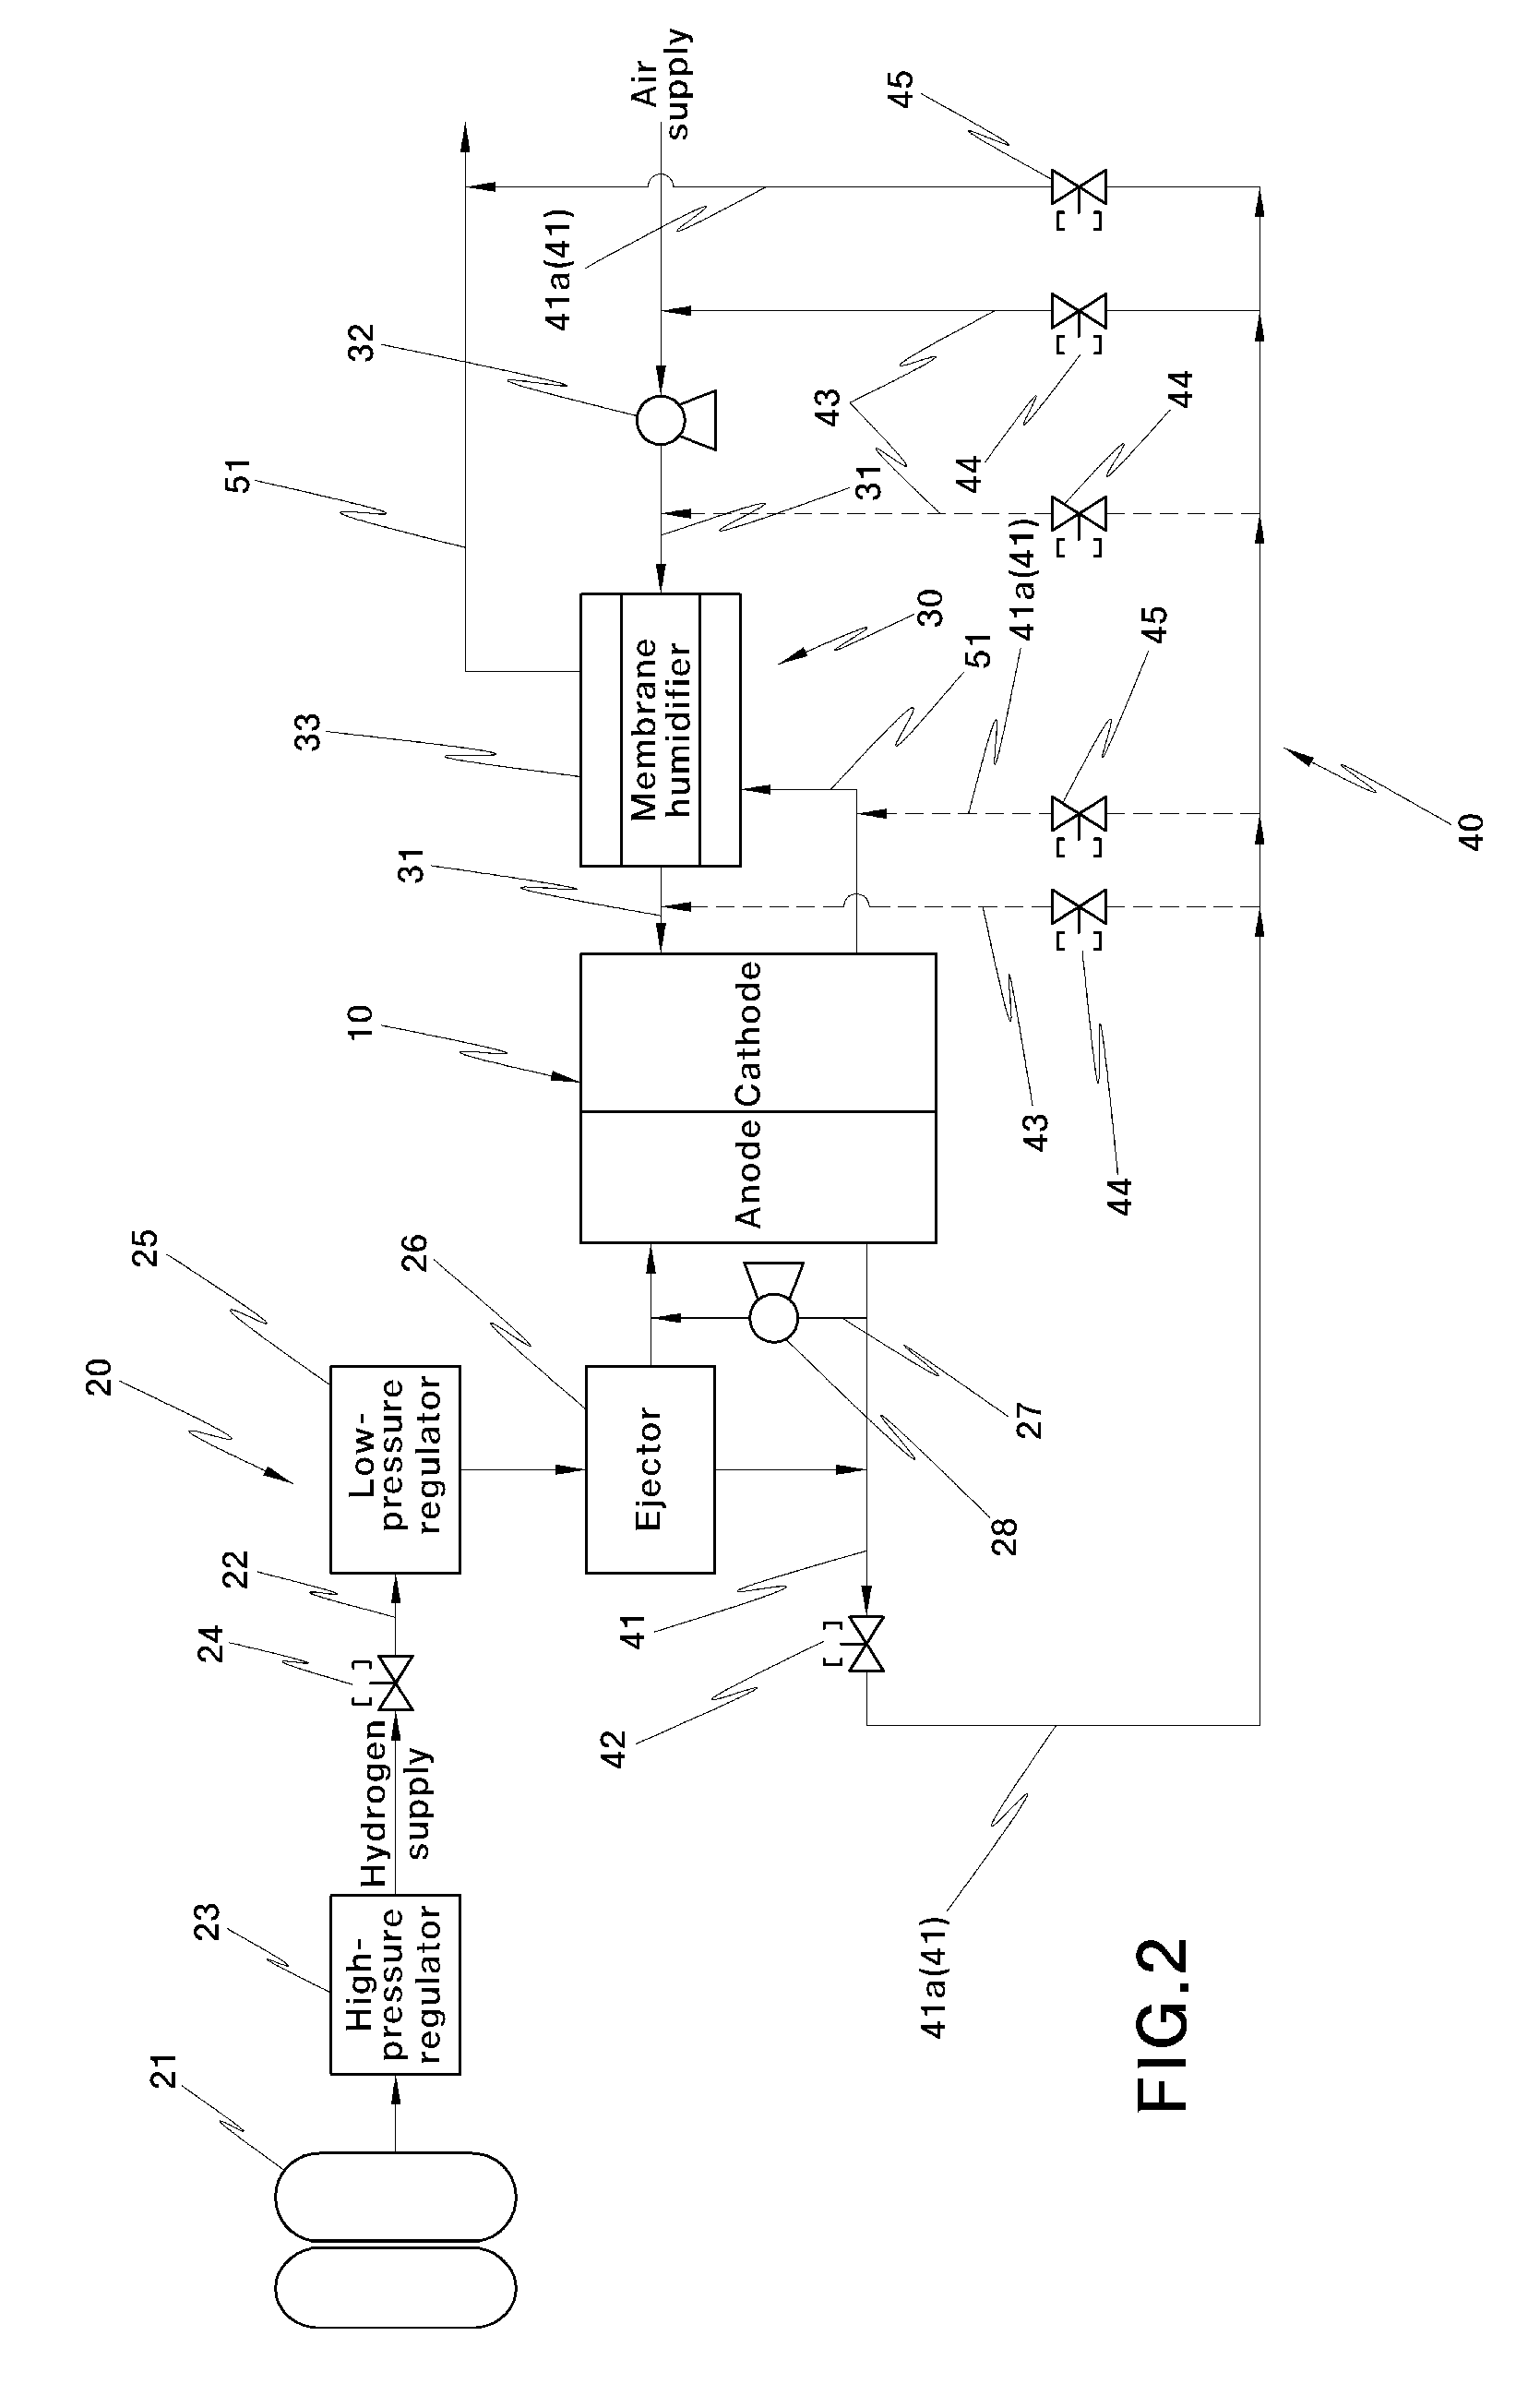 Hydrogen exhaust system for fuel cell vehicle